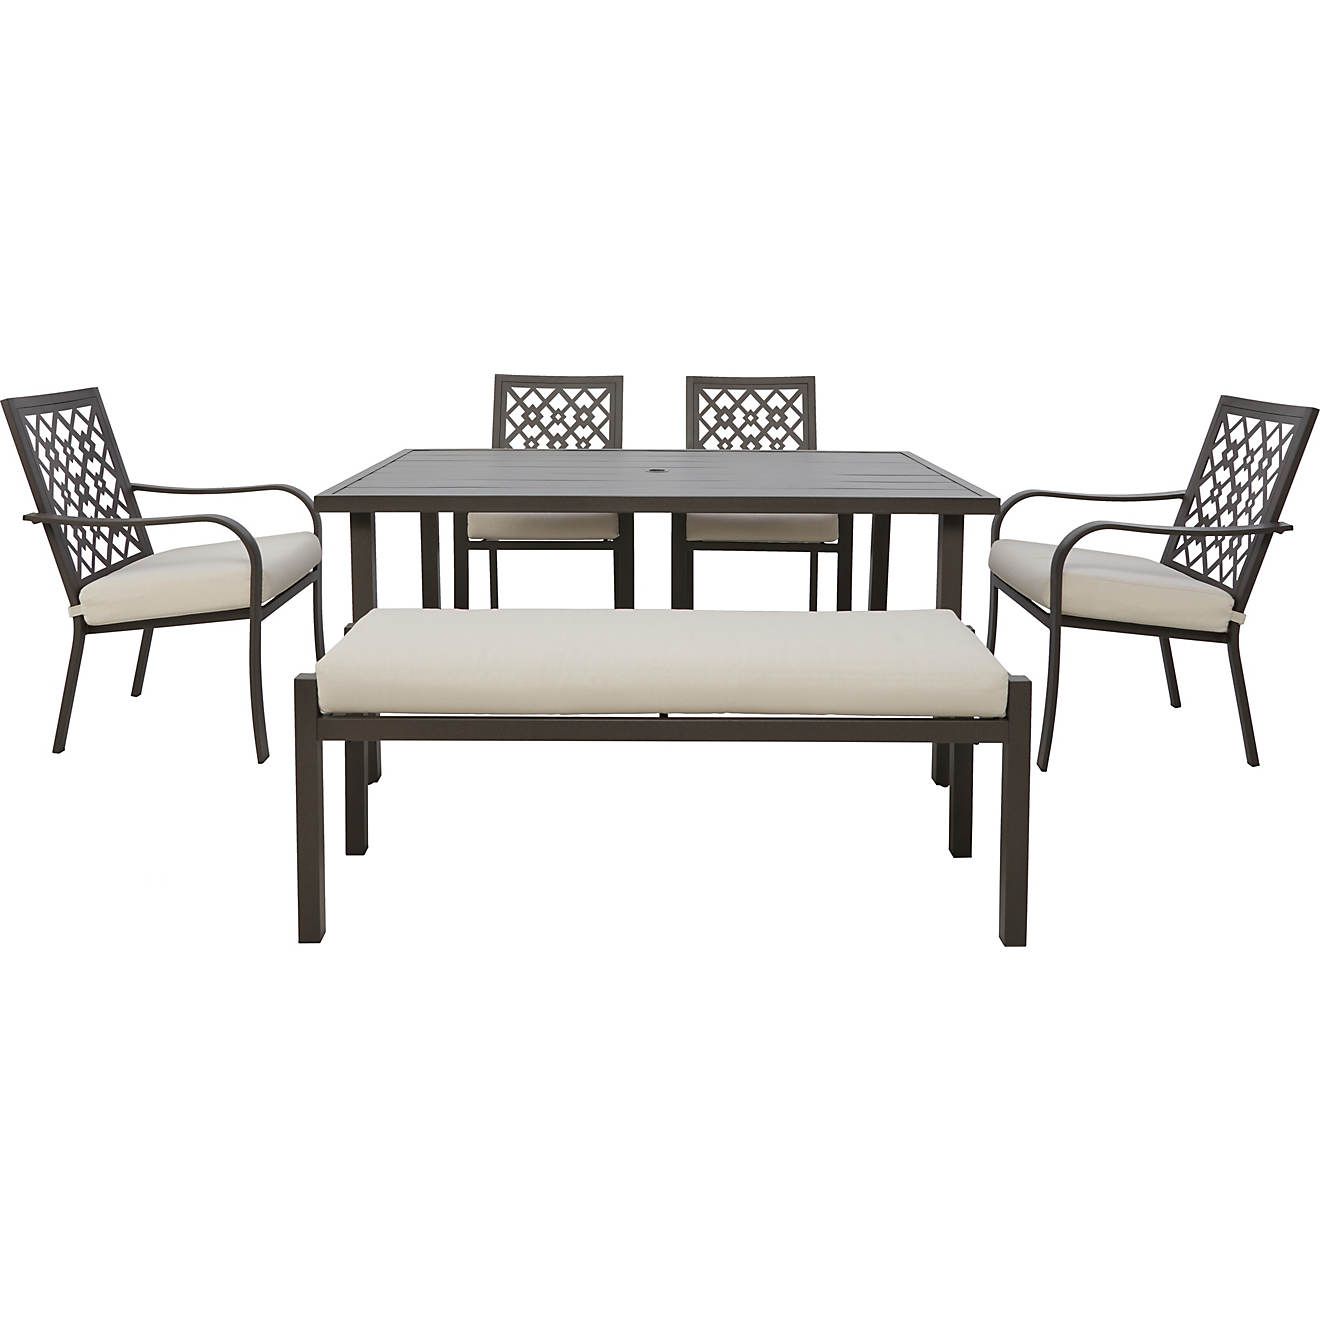 Mosaic 6-Piece Dining Set | Academy Sports + Outdoor Affiliate